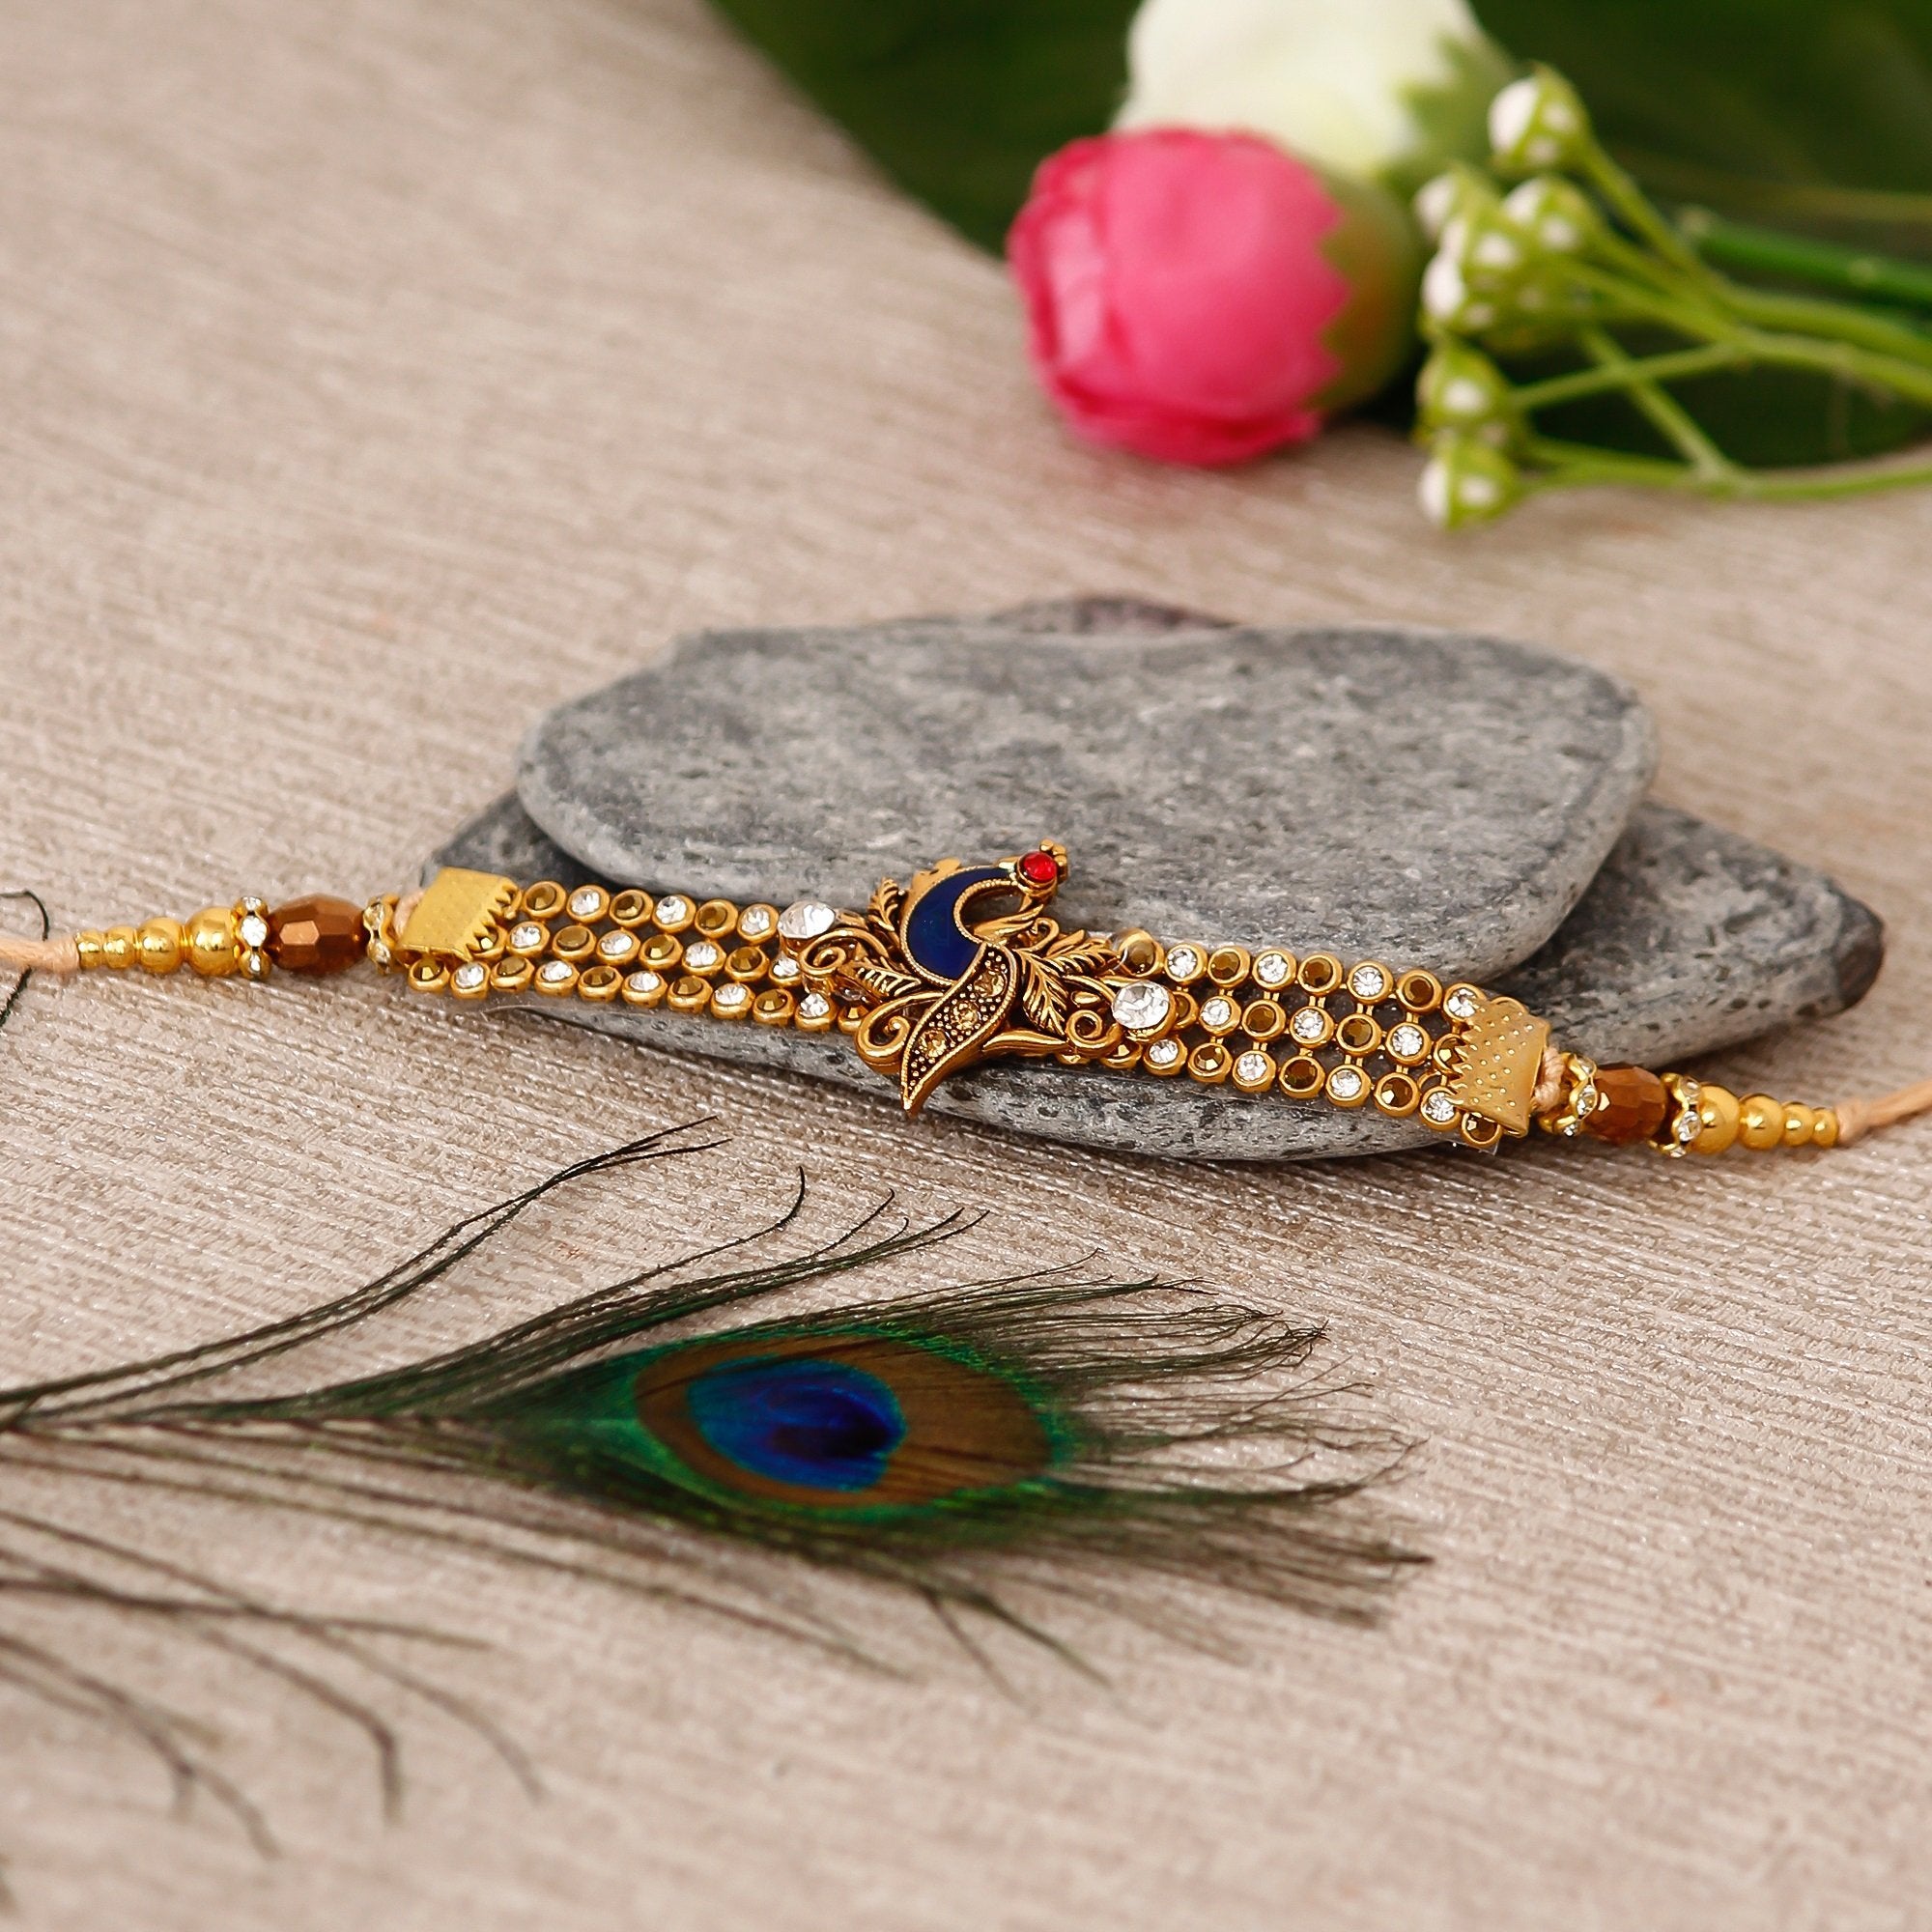 Designer Peacock Rakhi with Badam and Cashew (200 gm each, total 400 gm) and Roli Chawal Pack, Best Wishes Greeting Card 1